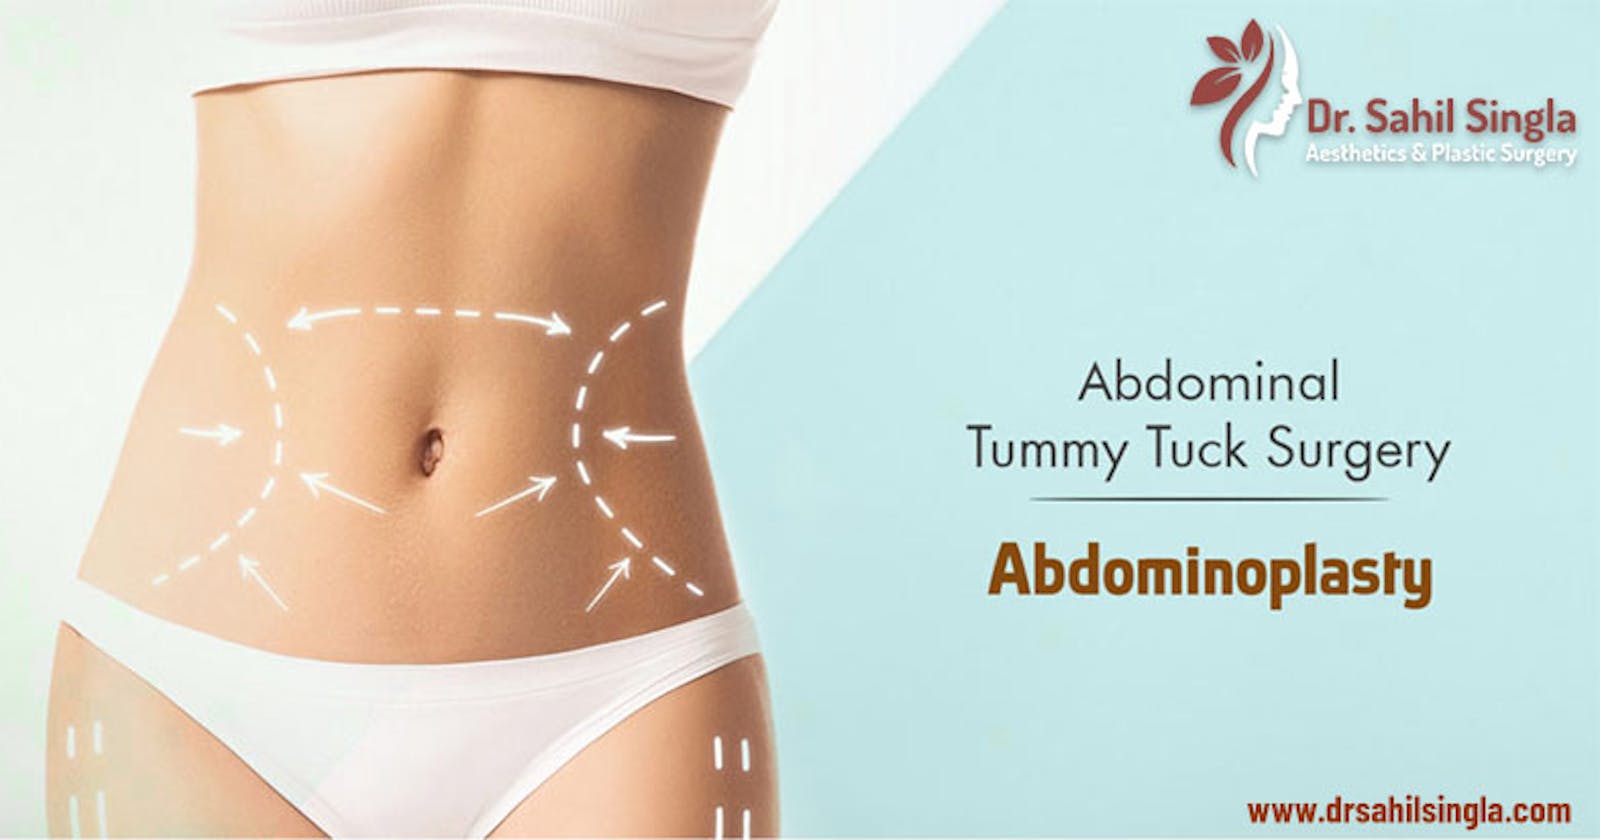 Abdominoplasty: Who is it for?